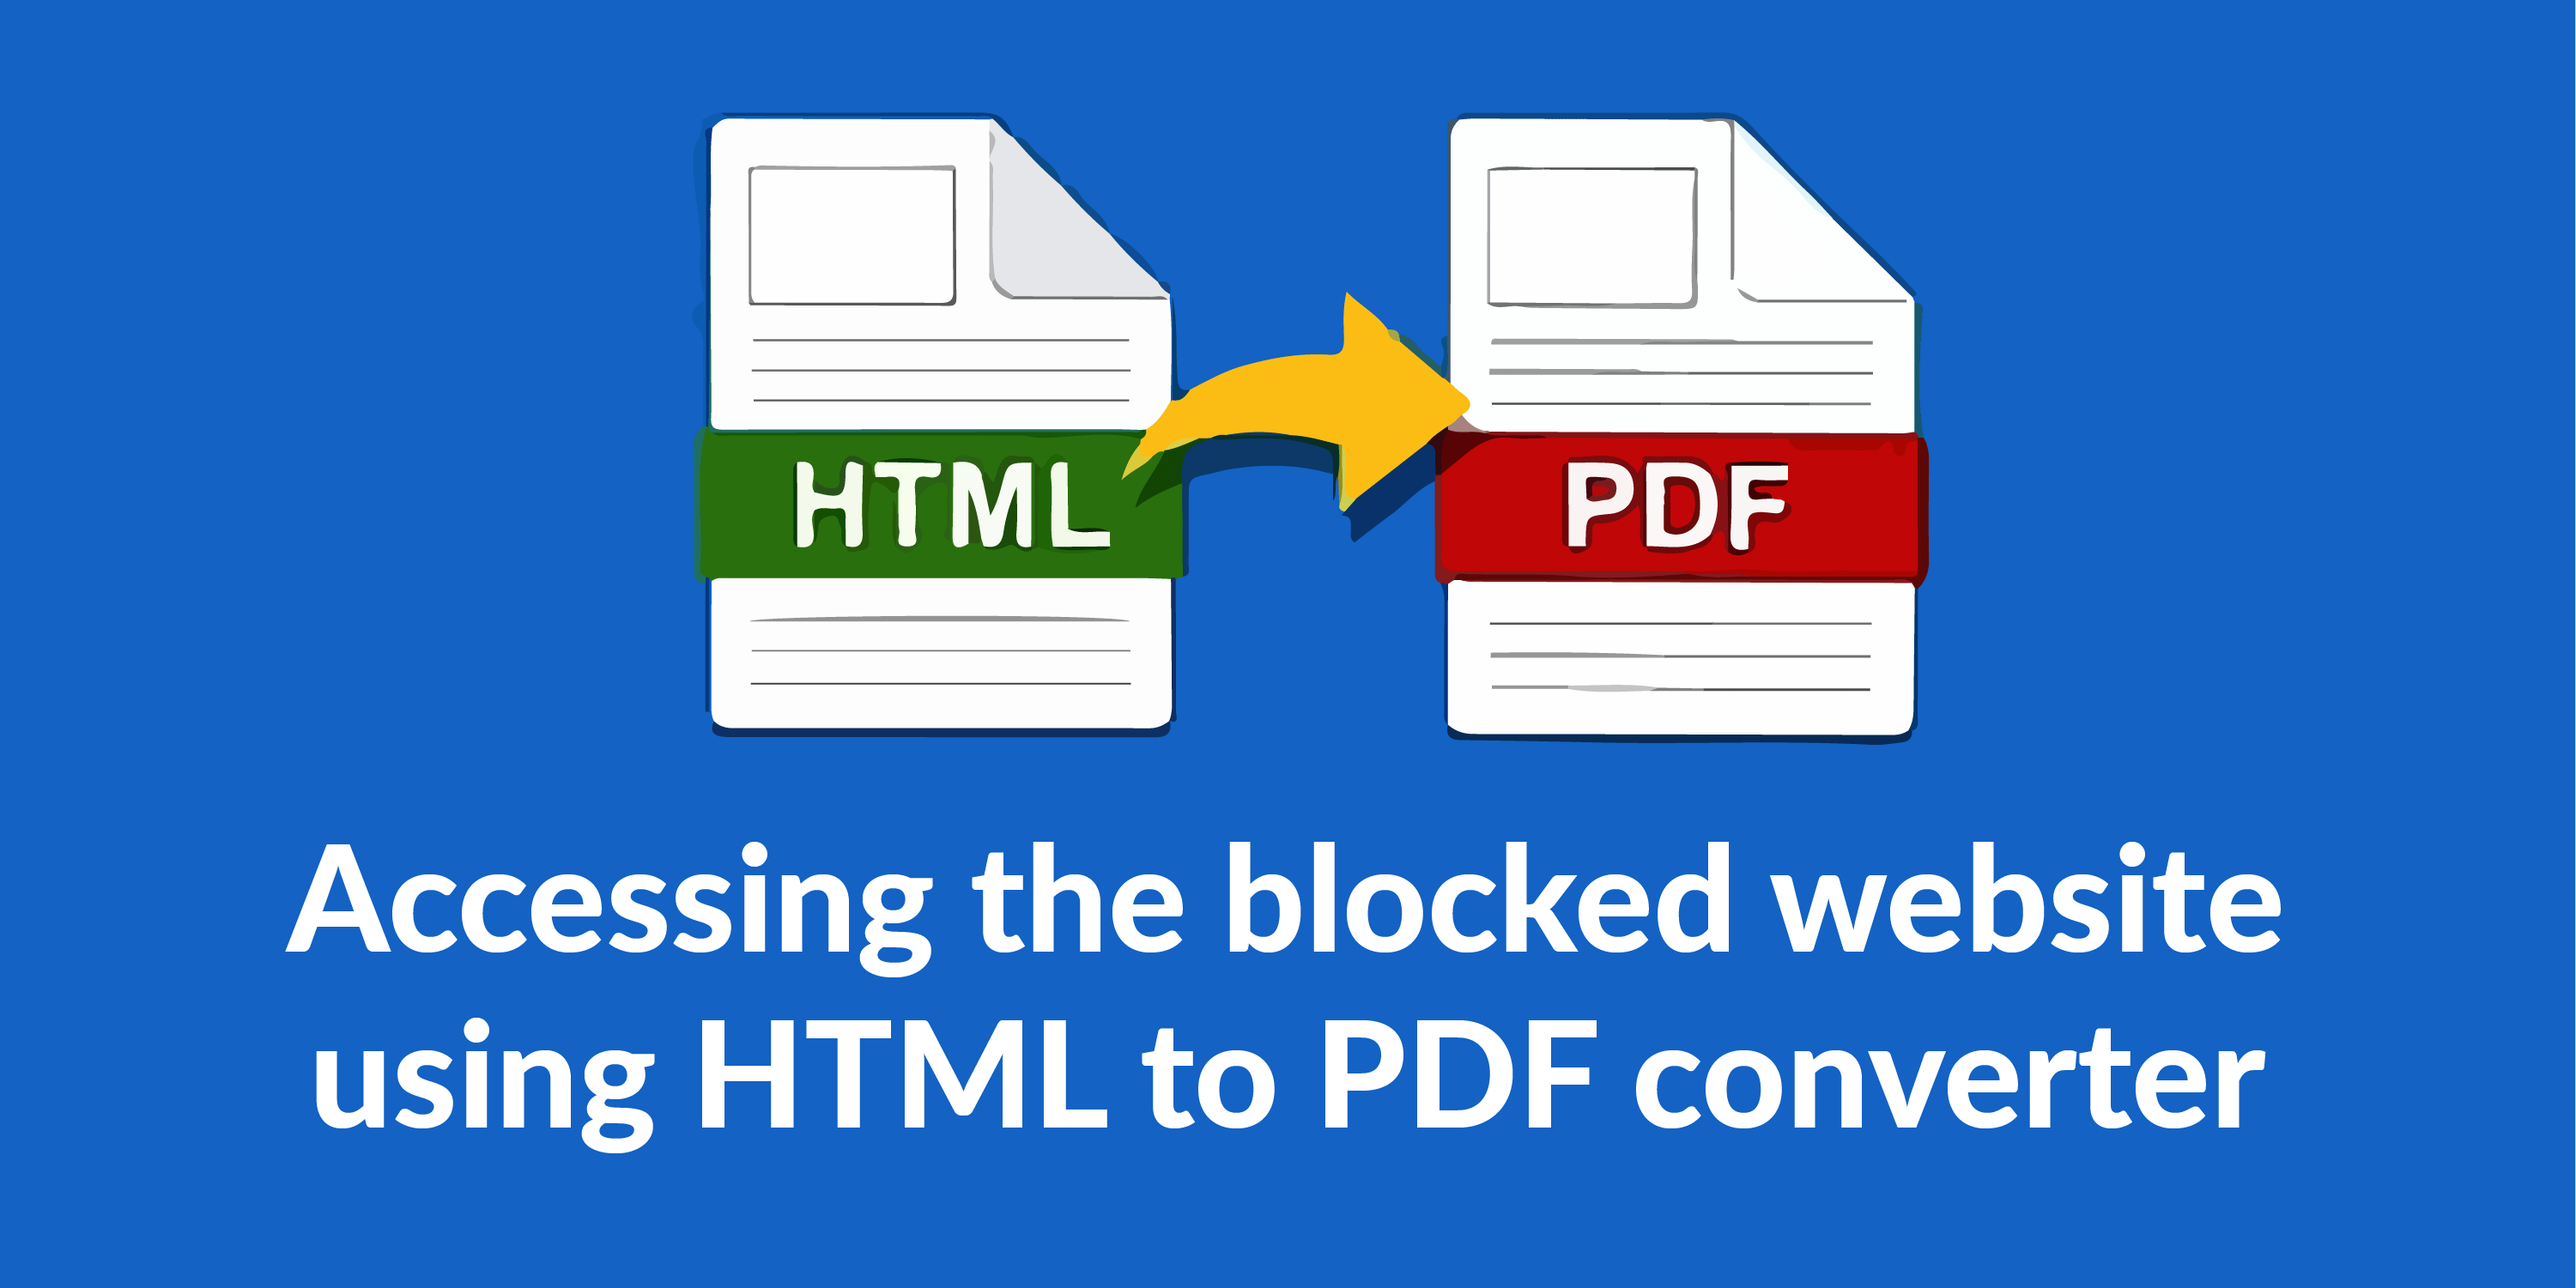 Accessing the Blocked Websites Using HTML to PDF Converter